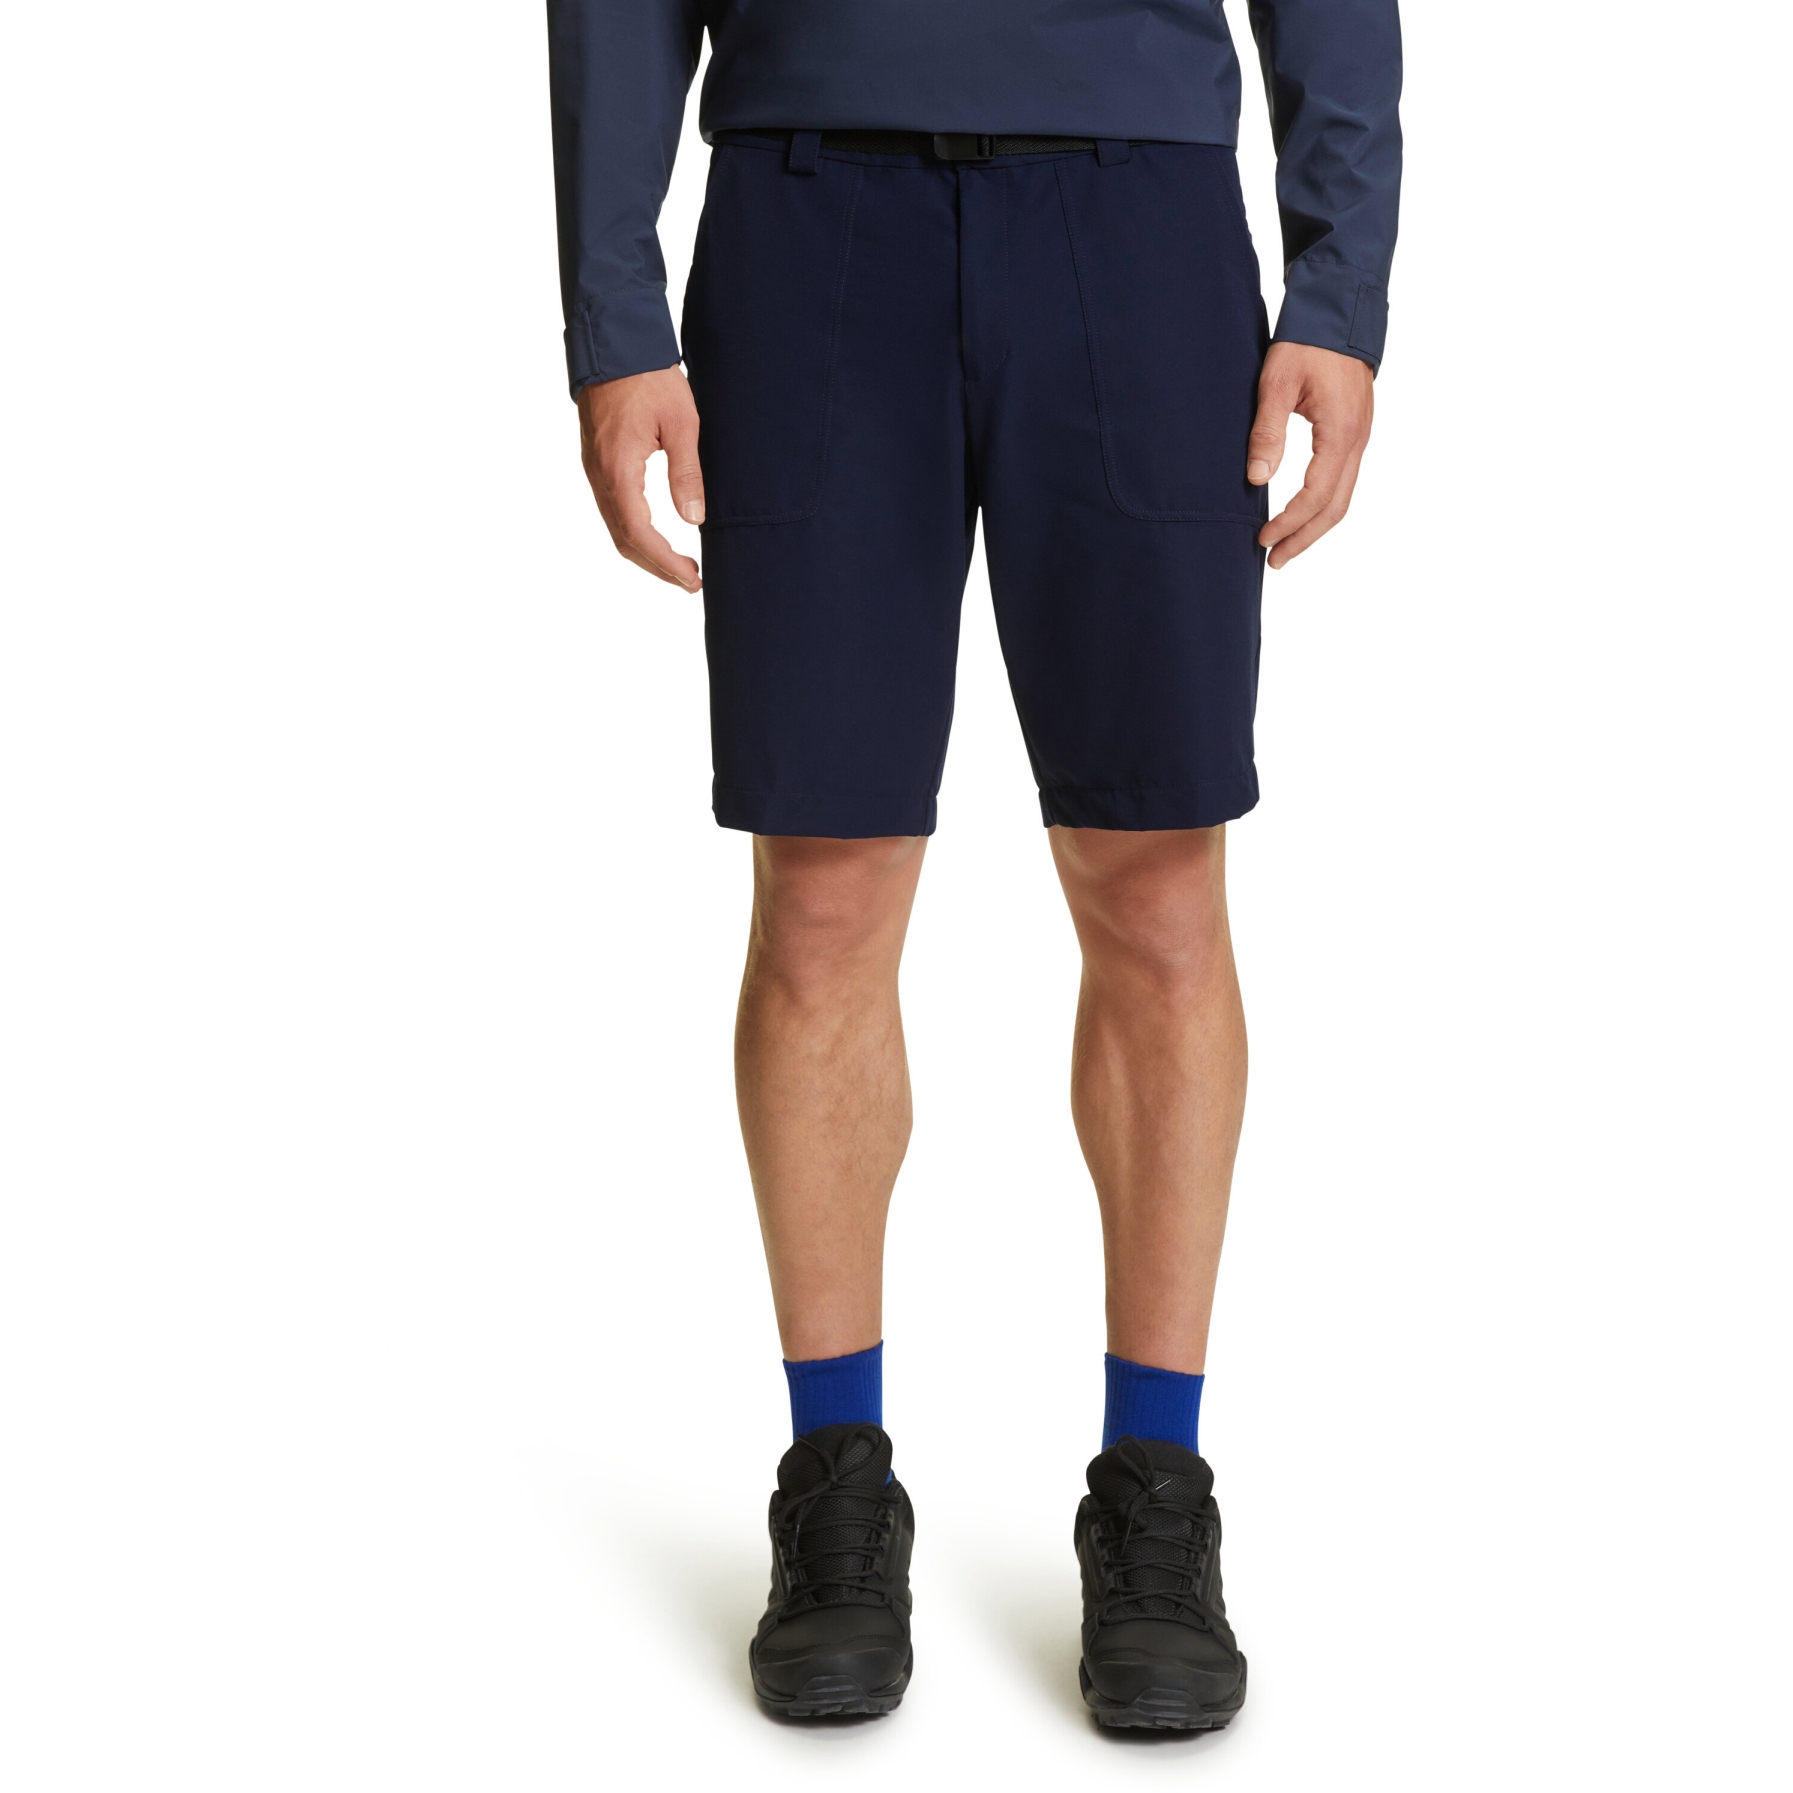 Picture of Falke TK Shorts - space blue 6116